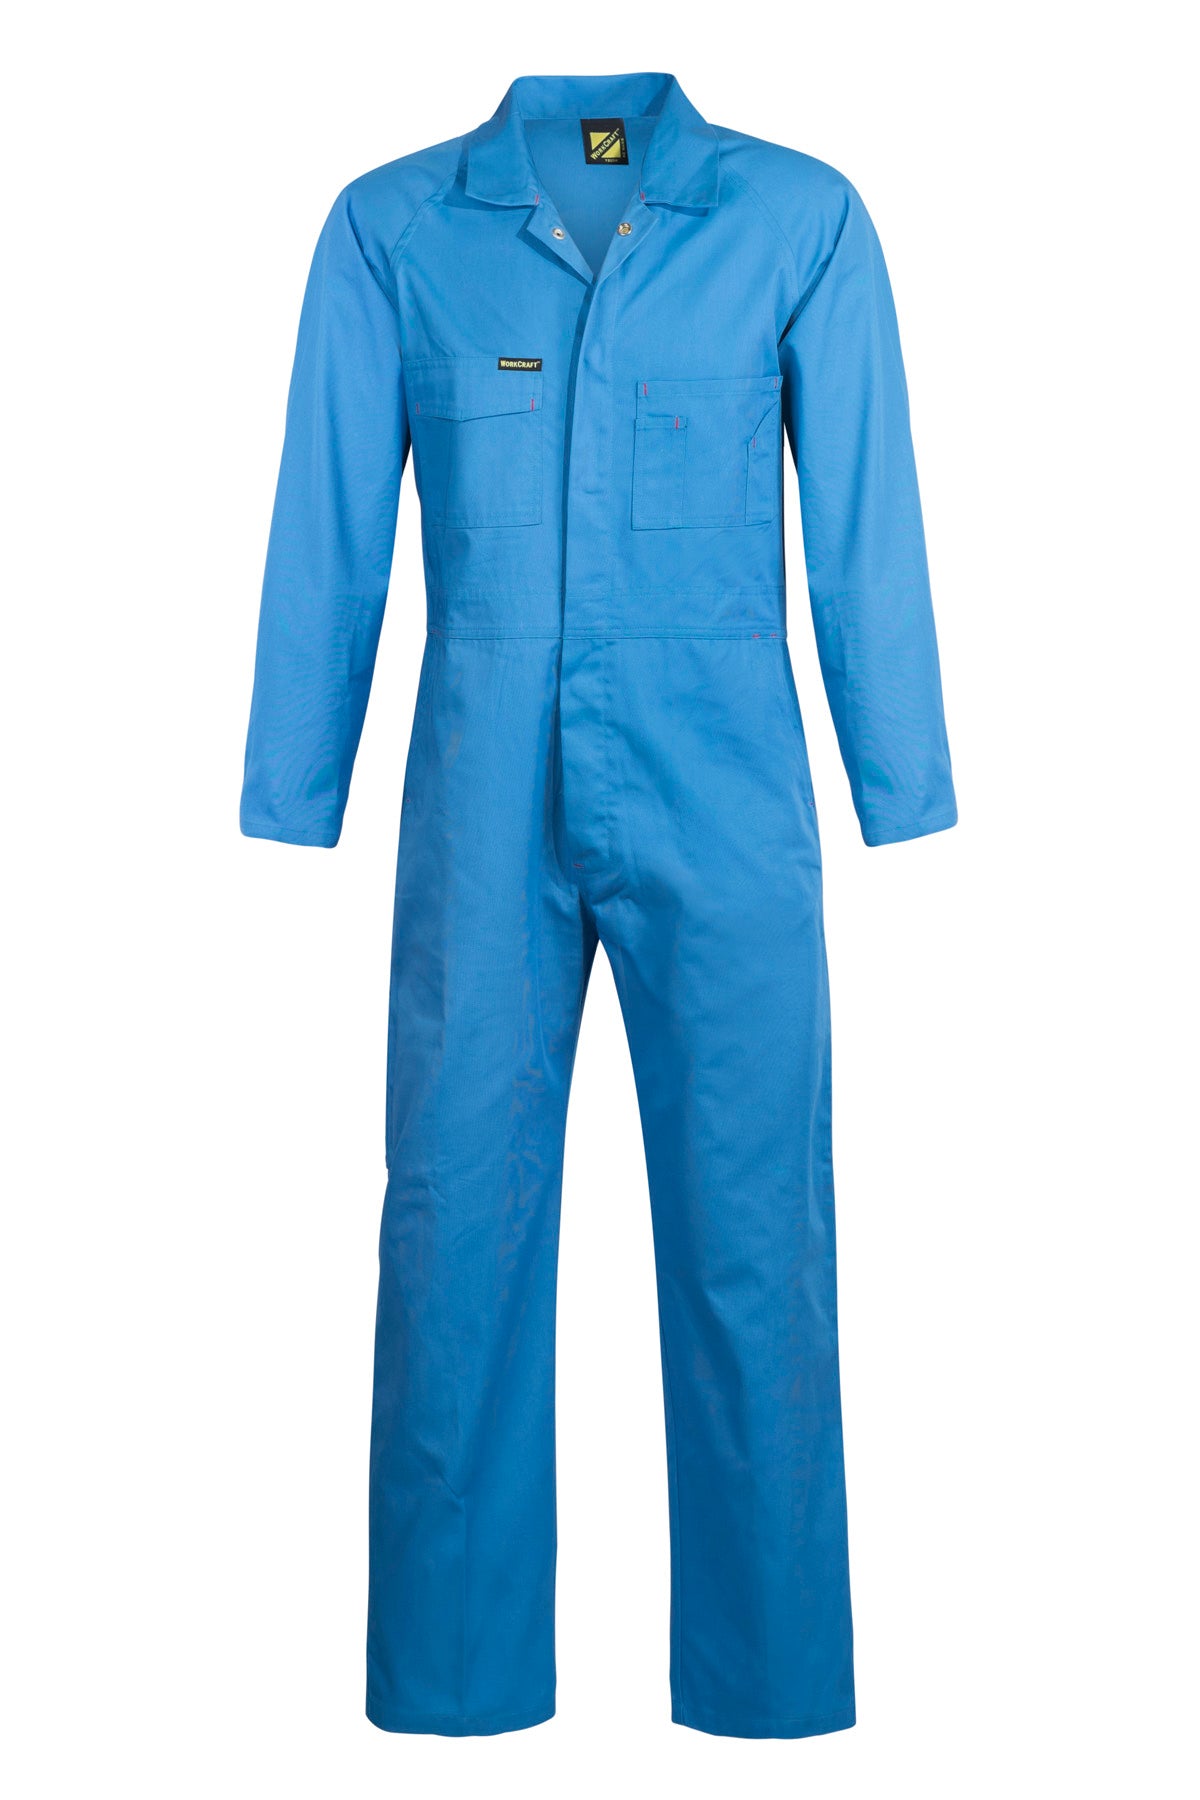 220 Gsm Poly Cotton Twill Coveralls - made by Workcraft